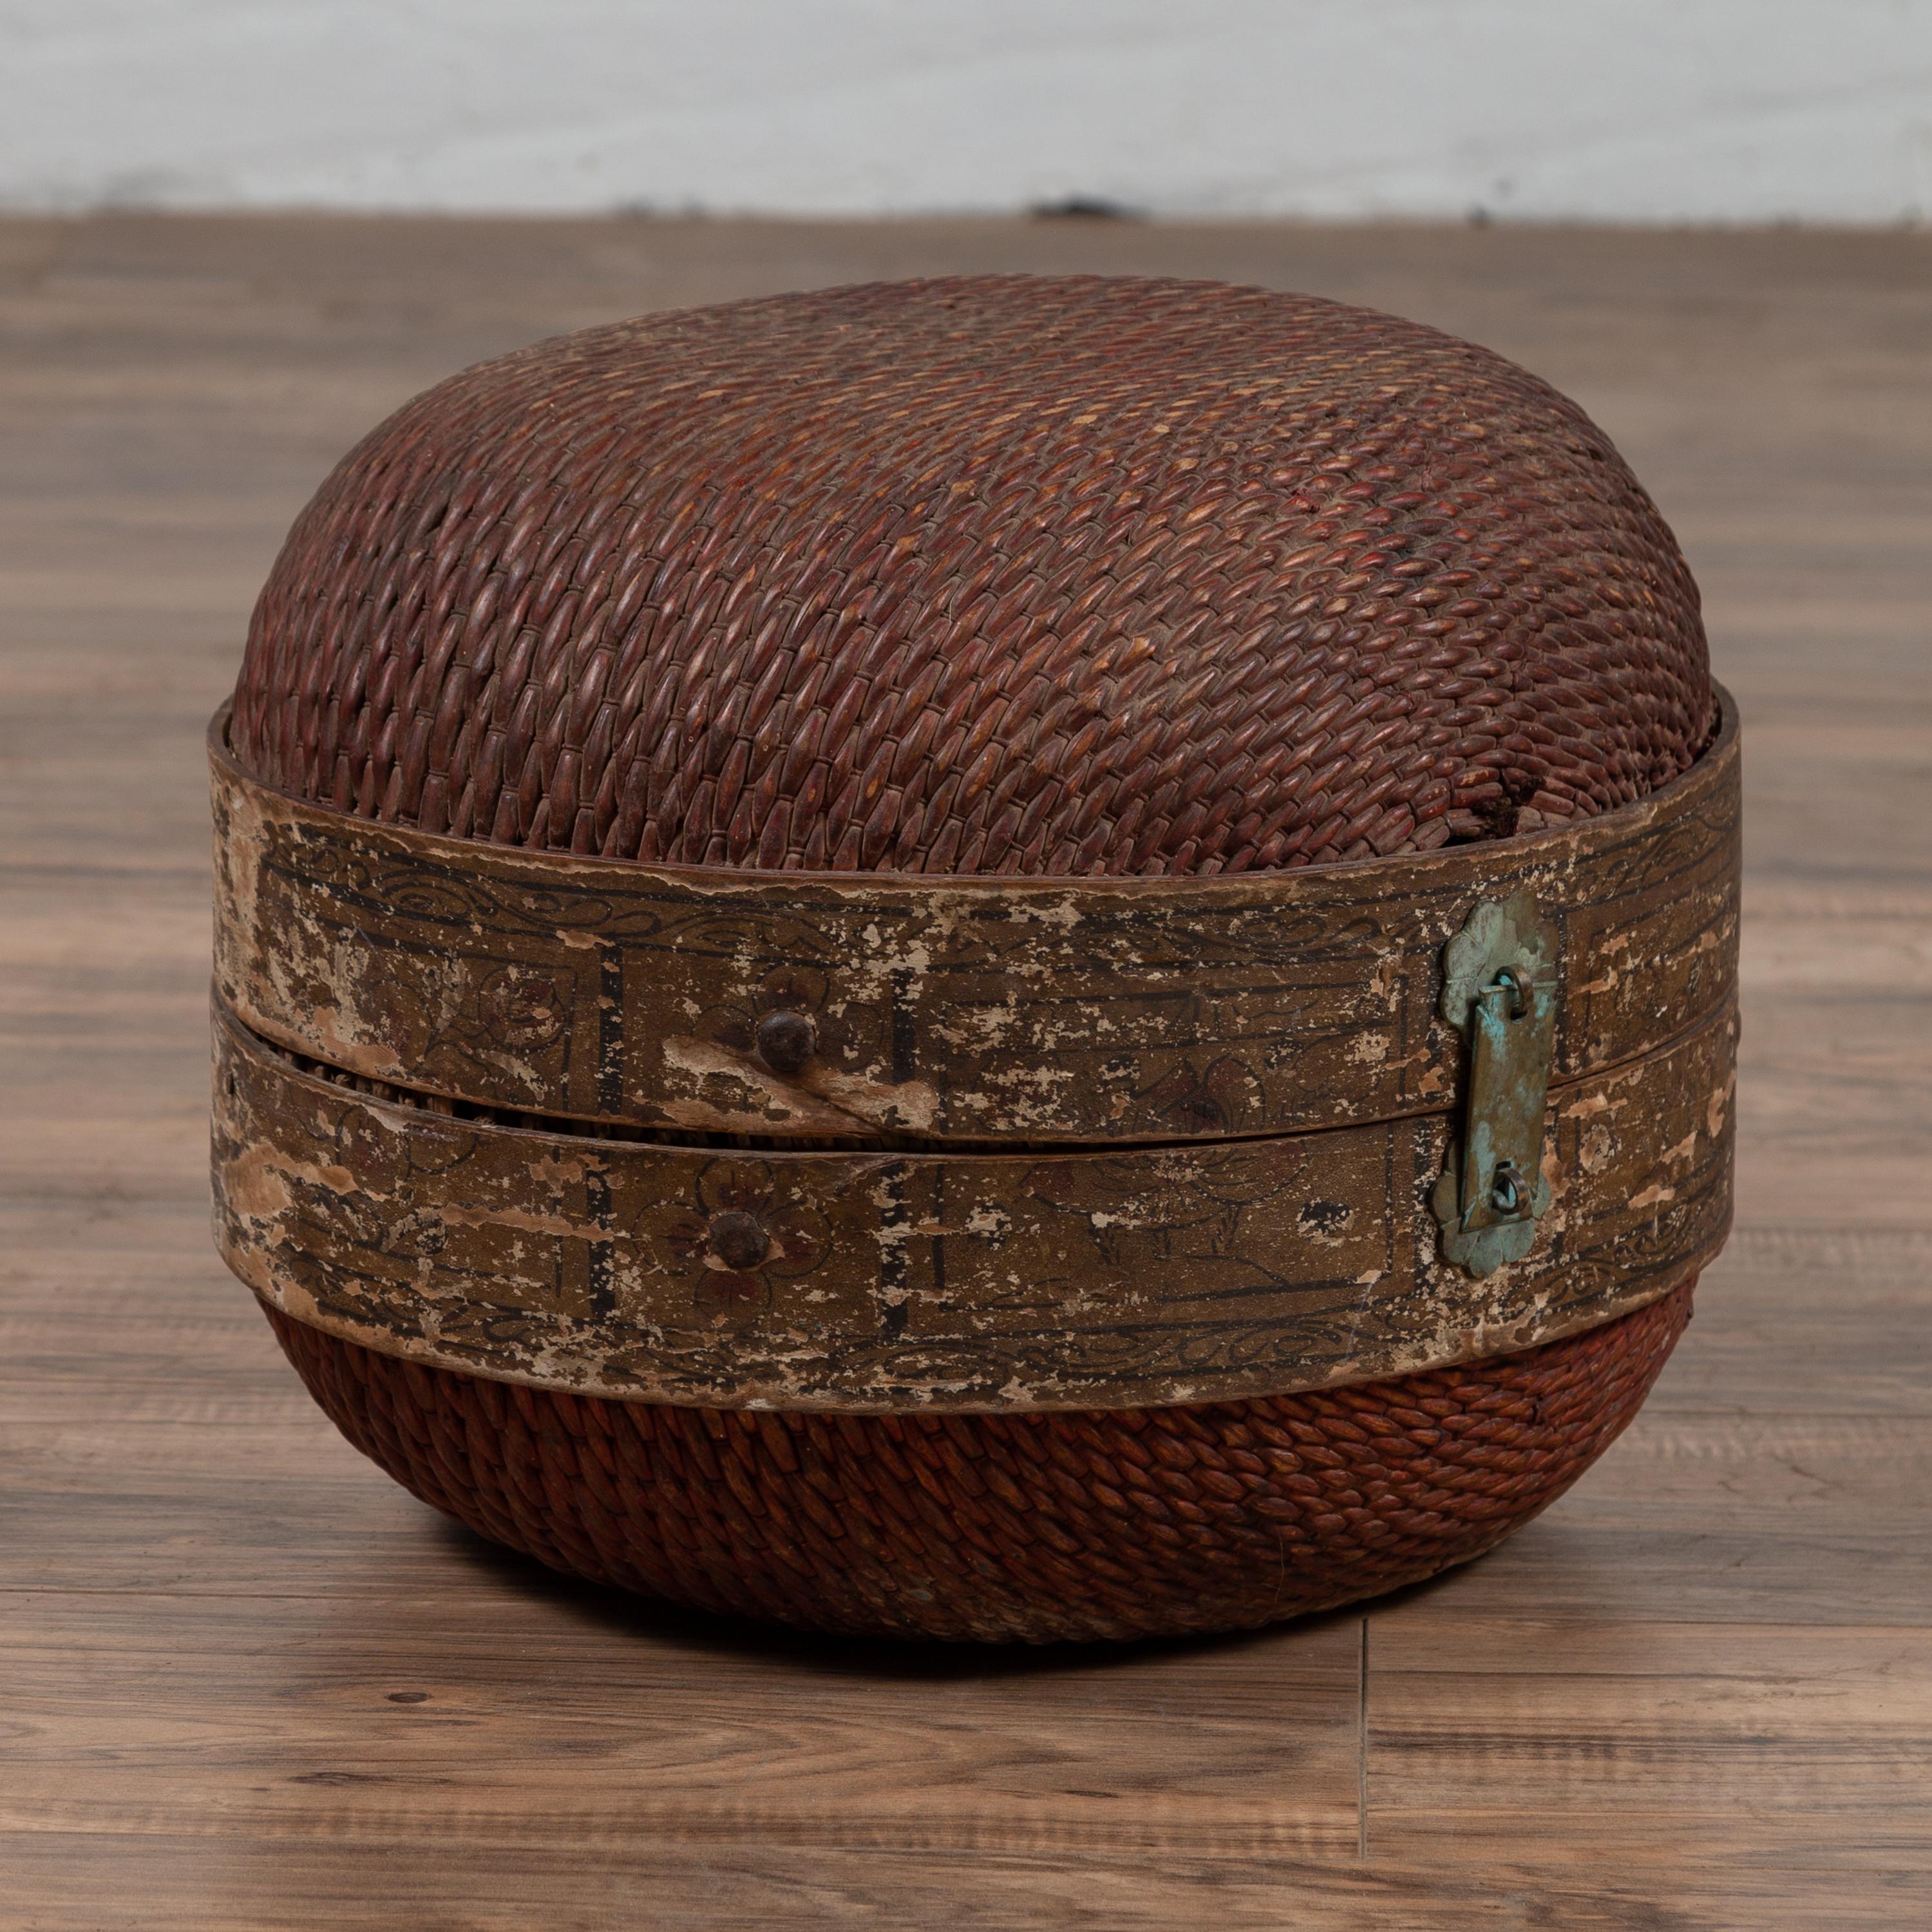 A vintage Chinese rattan hat box from the mid-20th century with weathered patina and oxidized accents. We have similar ones available. Born in China during the midcentury period, this rustic hat box features a rattan body, secured in the middle by